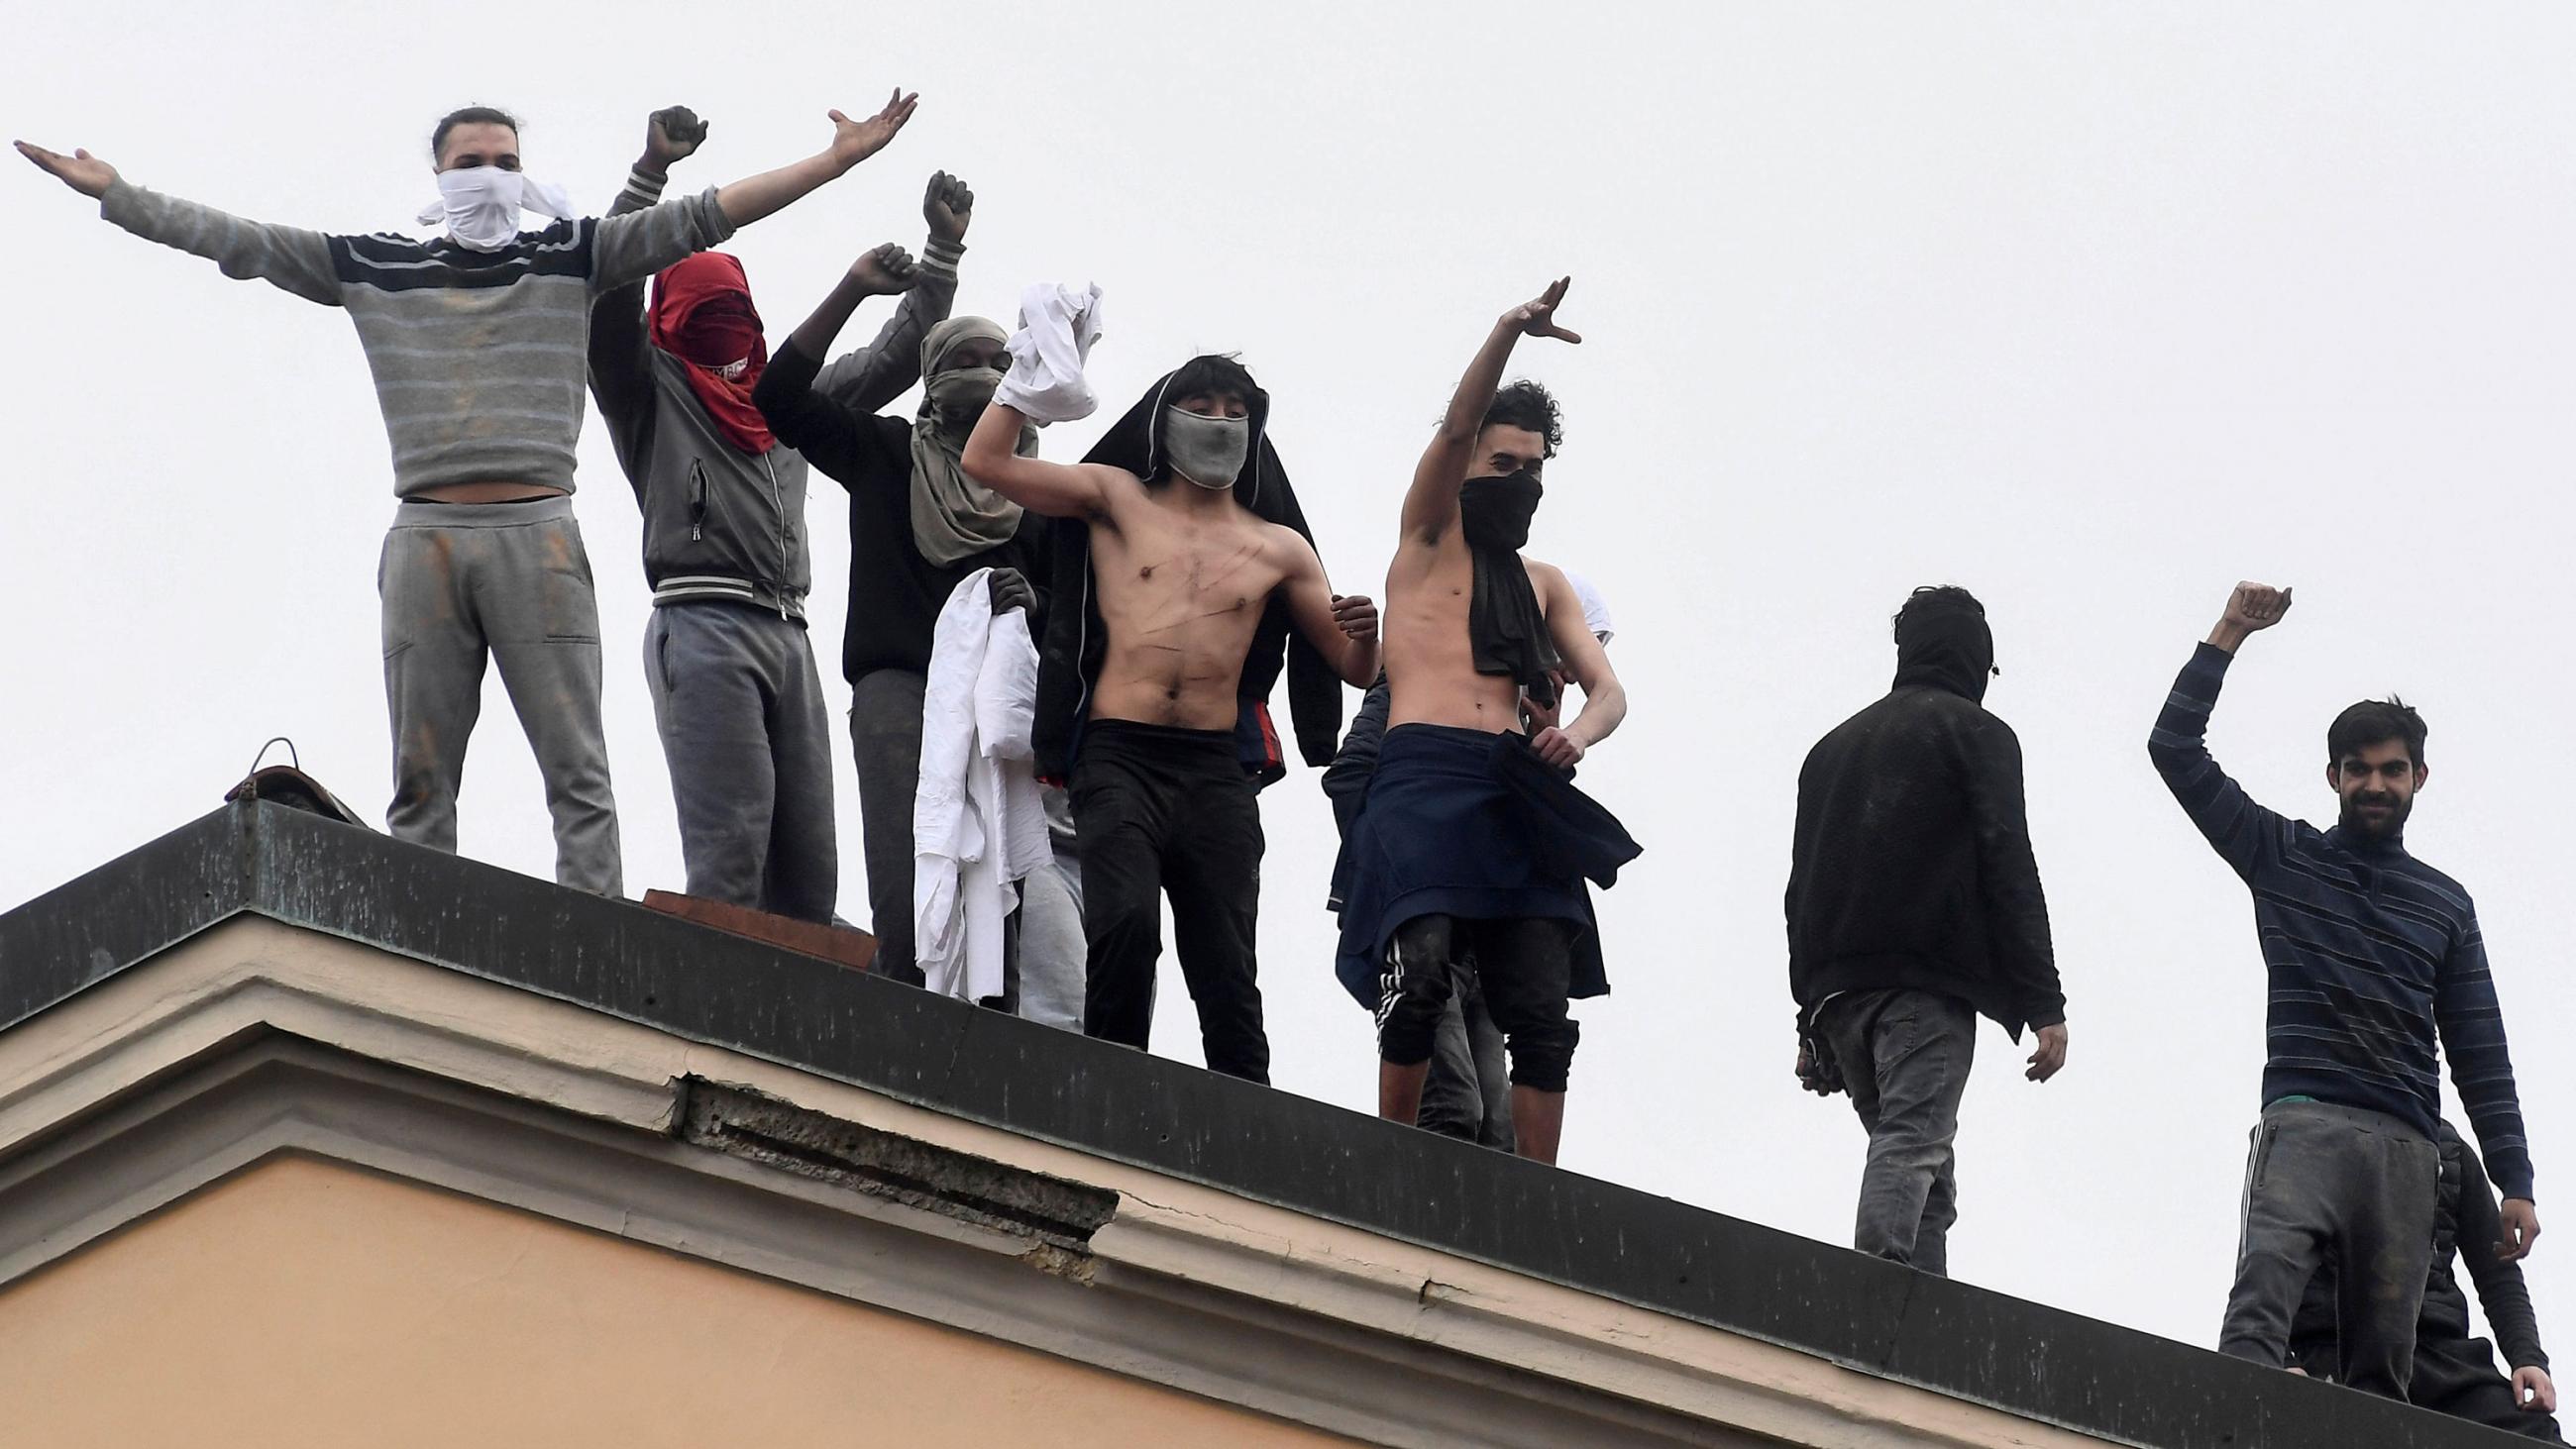 The photo shows a number of inmates, some with bandanas over their faces, on the roof of a prison building shouting at the camera, which appears to be some distance away. 